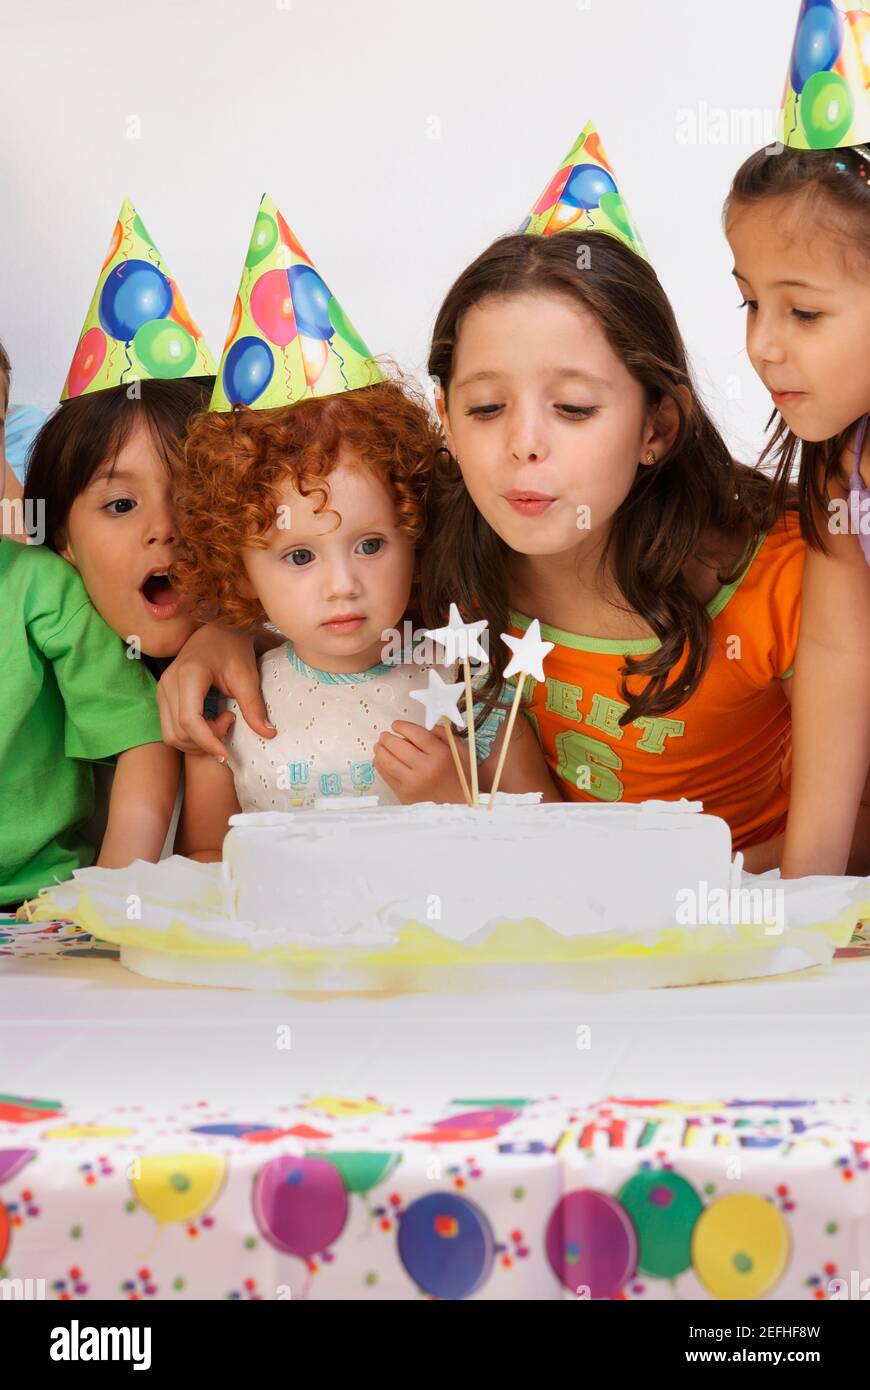 Group of children celebrating a birthday party Stock Photo